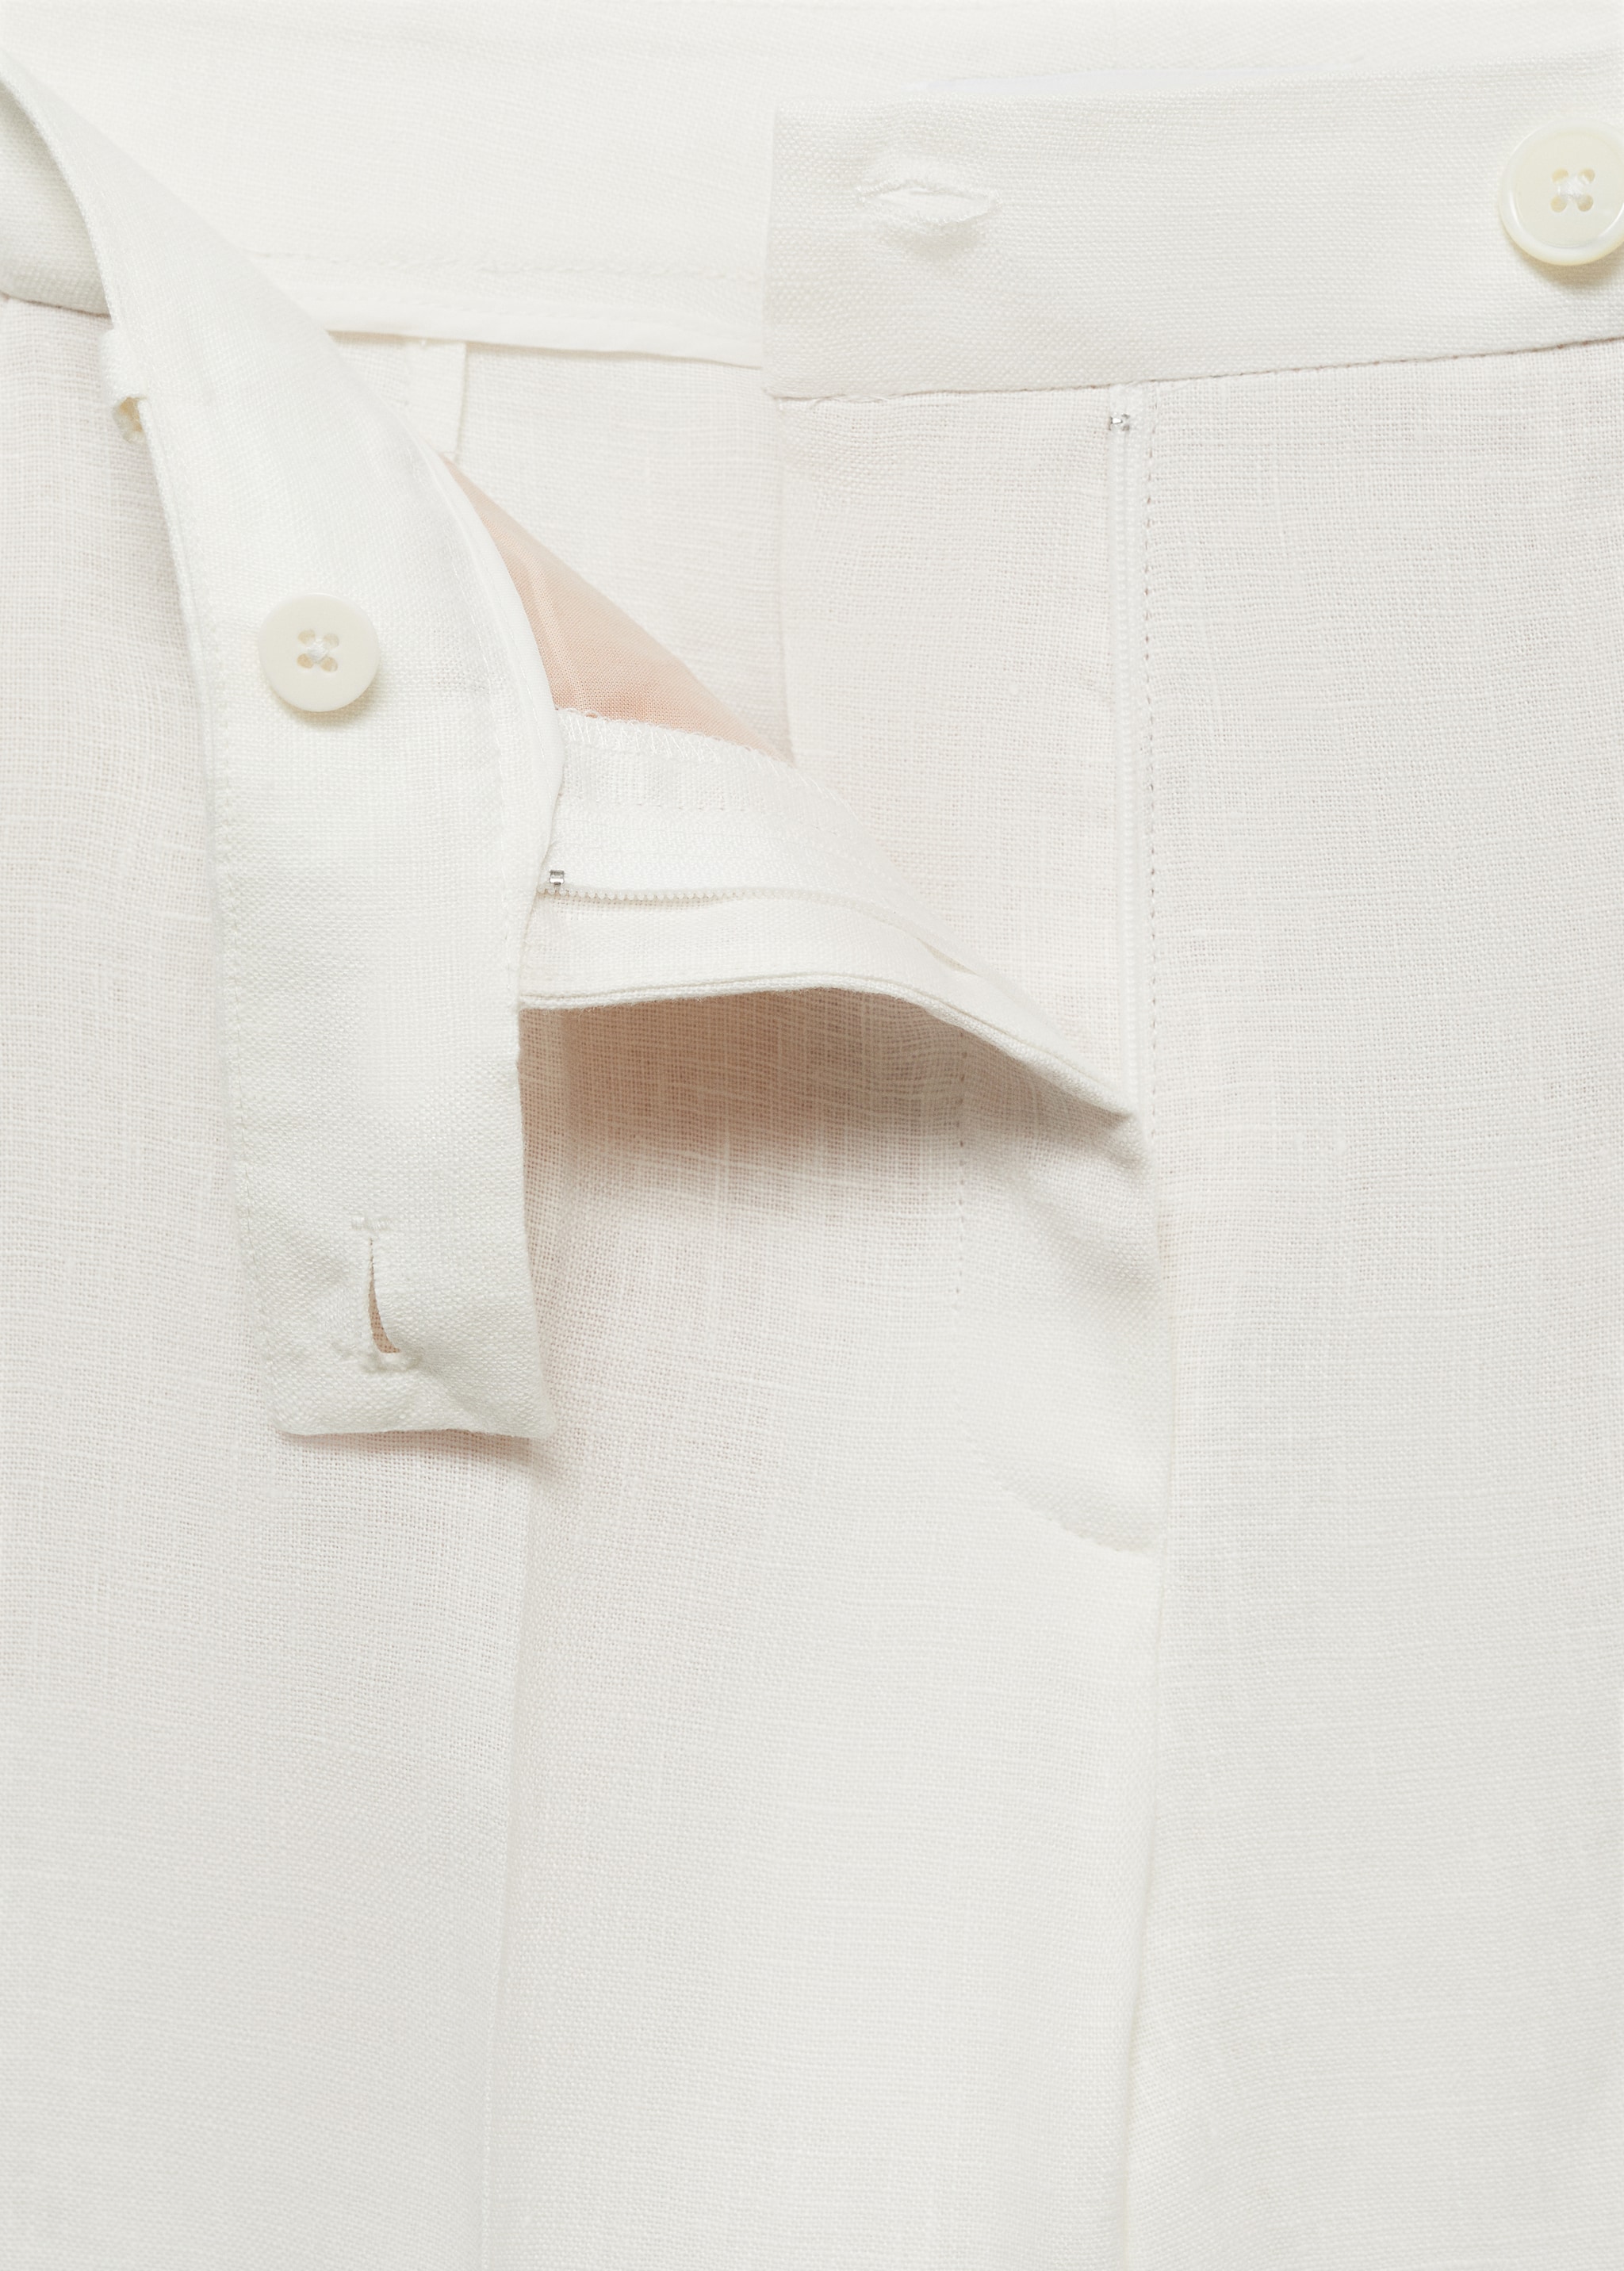 100% linen suit trousers - Details of the article 8